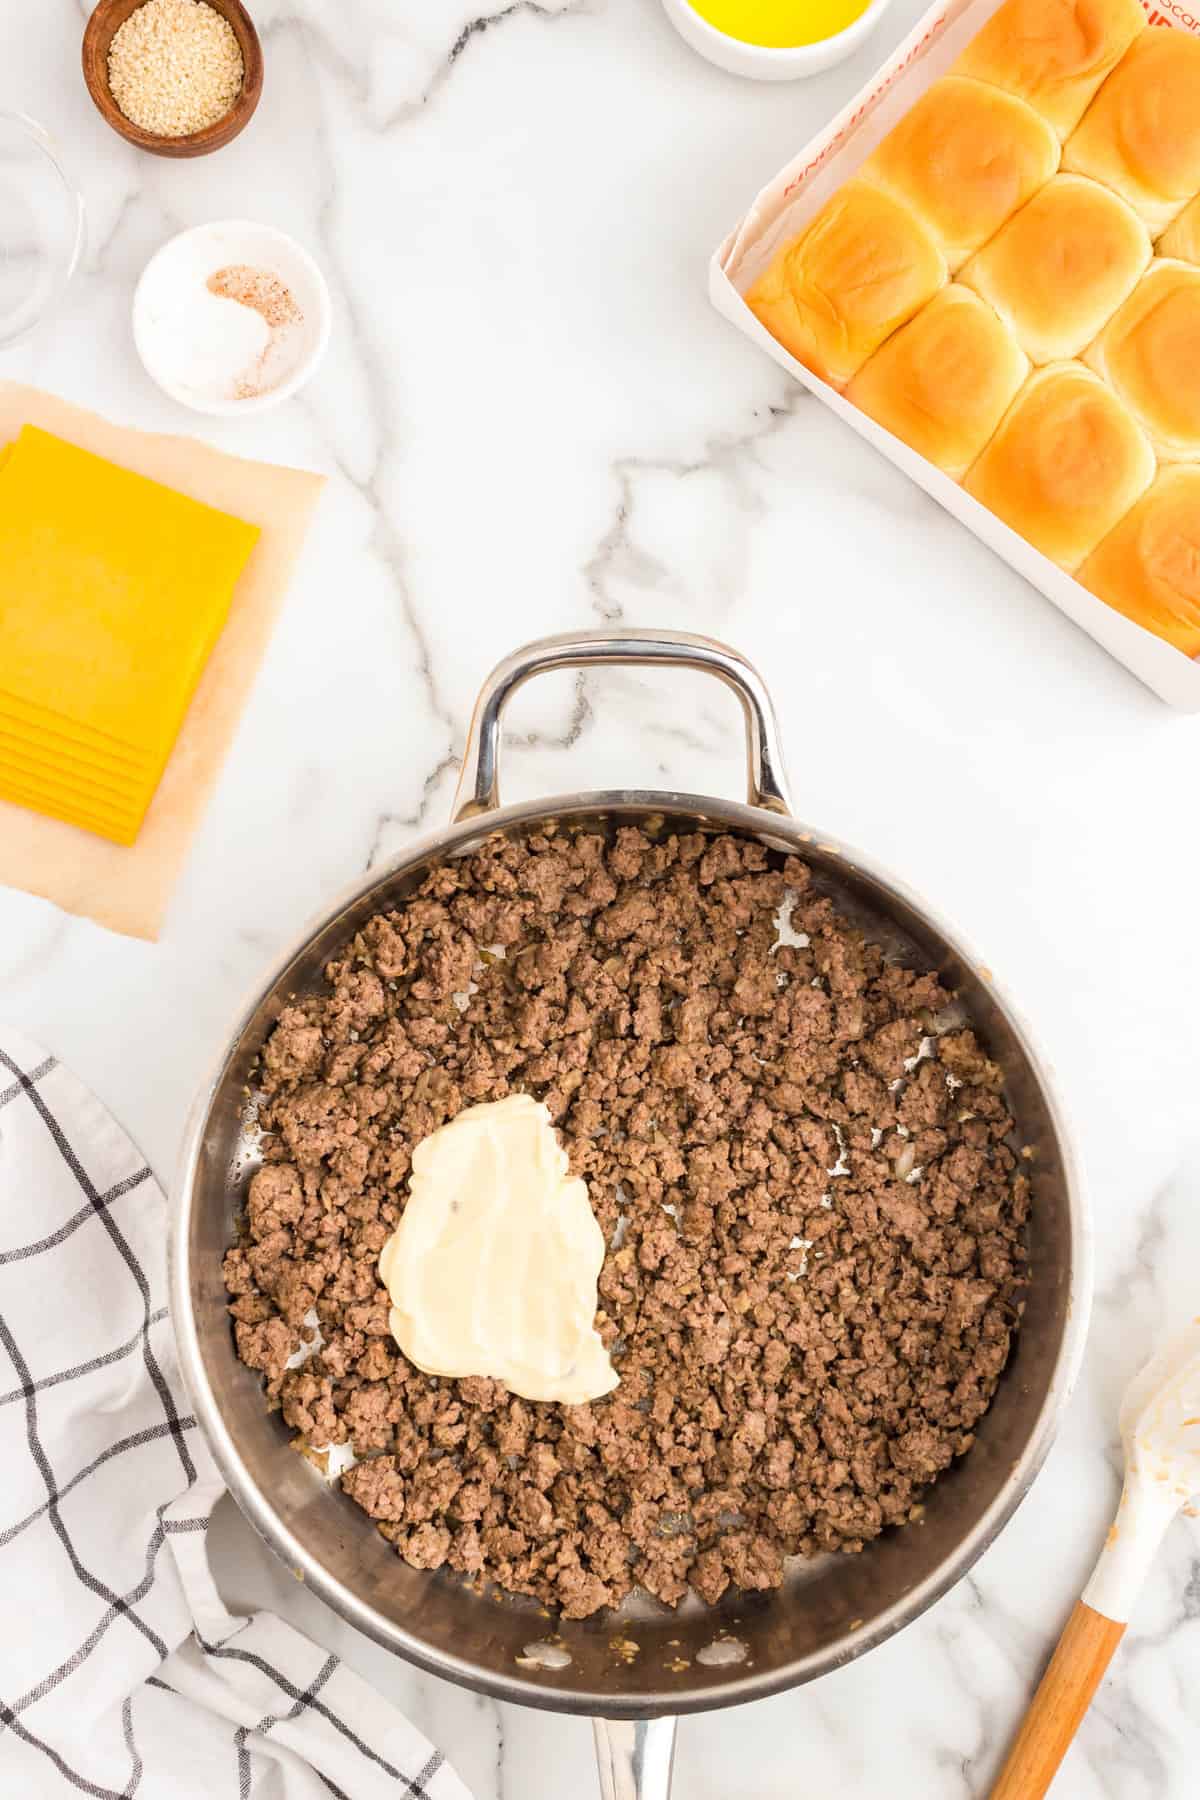 Adding mayo to ground beef skillet for Cheeseburger Sliders recipe